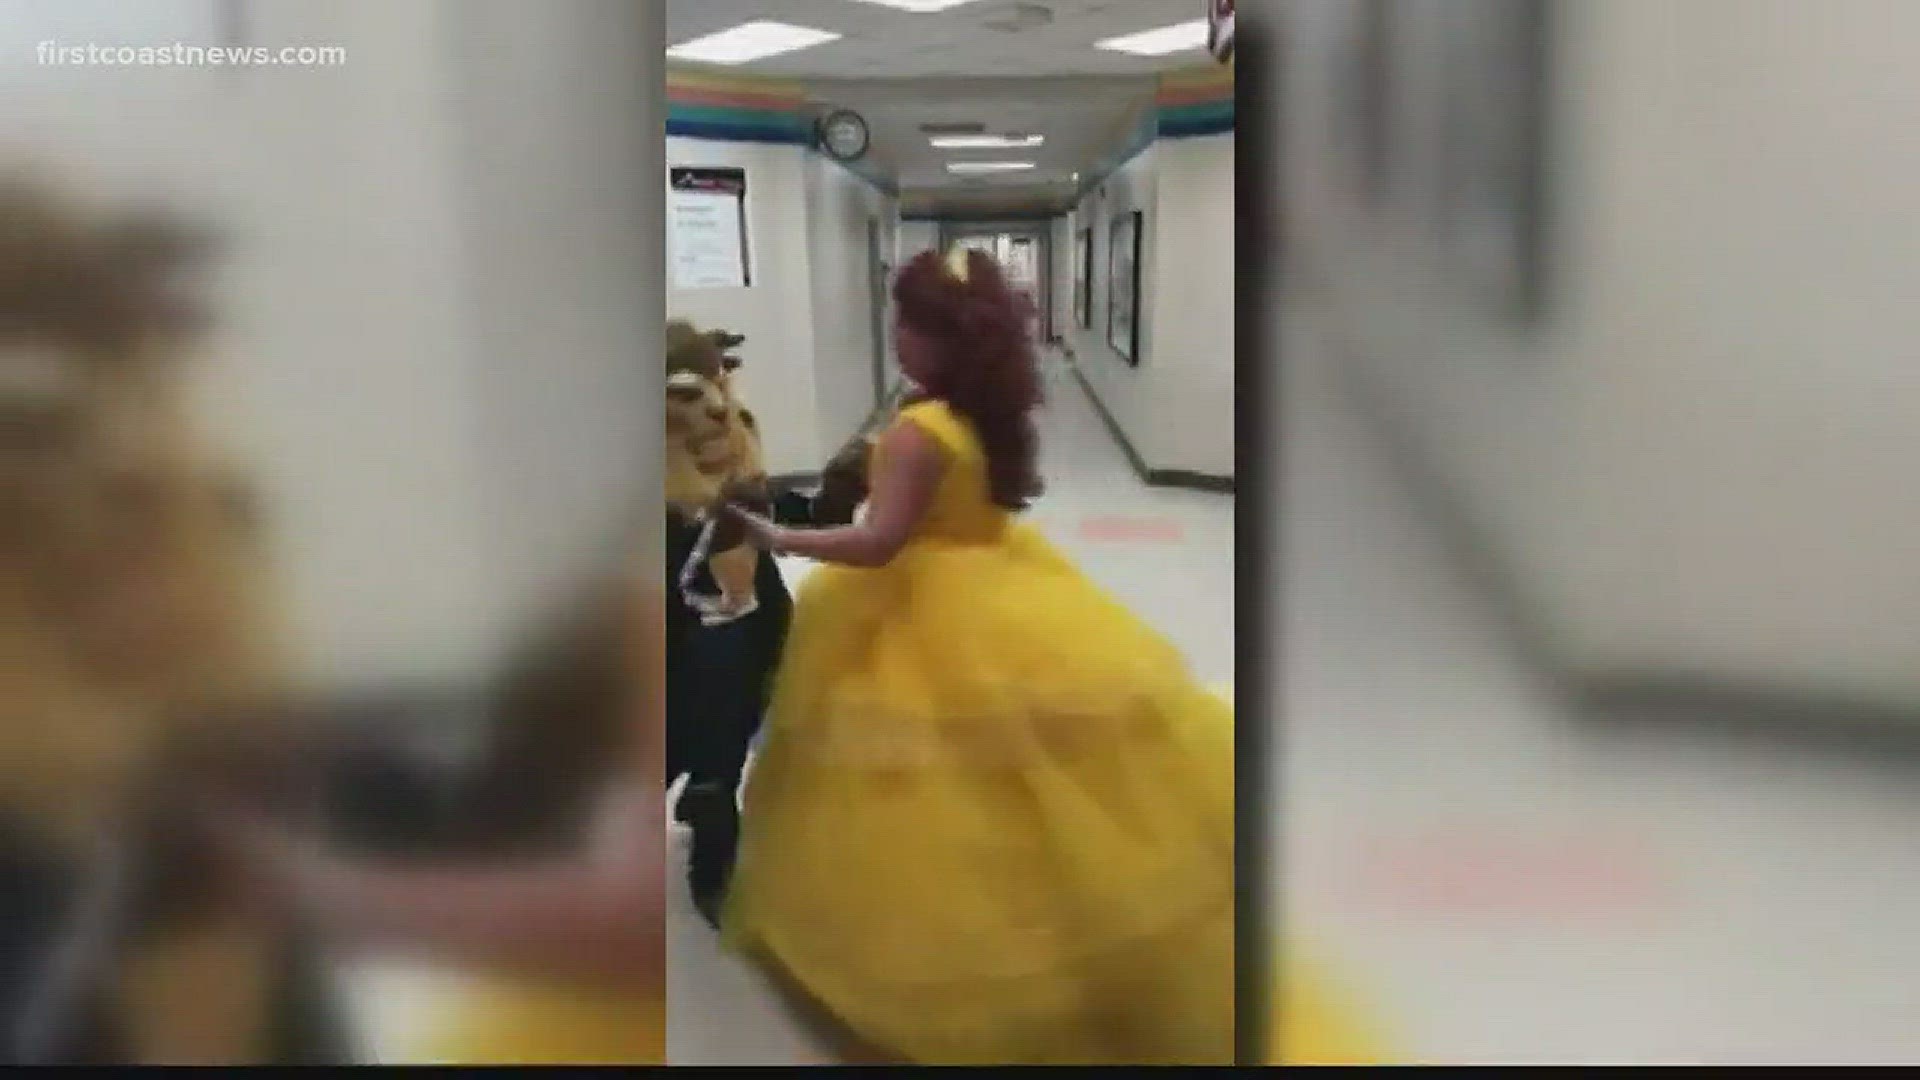 9-year-old Jared Cook dressed up as Beast and asked his longtime teacher, Melissa Allen, to dress up as Belle. A video of the two dancing has gone viral.